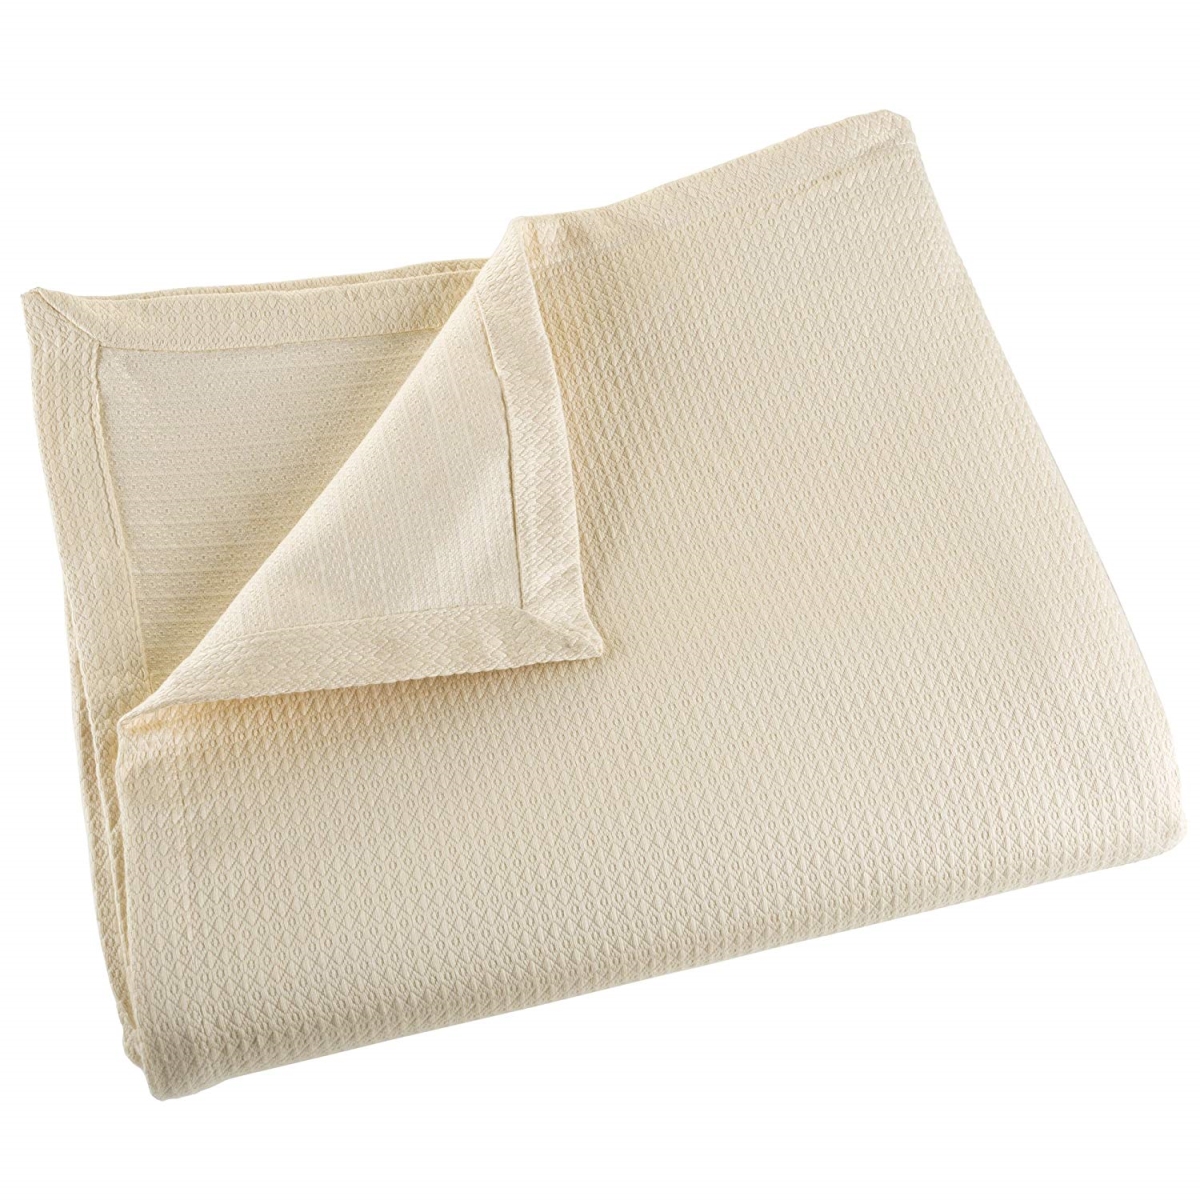 61a-43272 Soft Breathable 100 Percent Cotton Blanket, Cream - Full & Queen Size